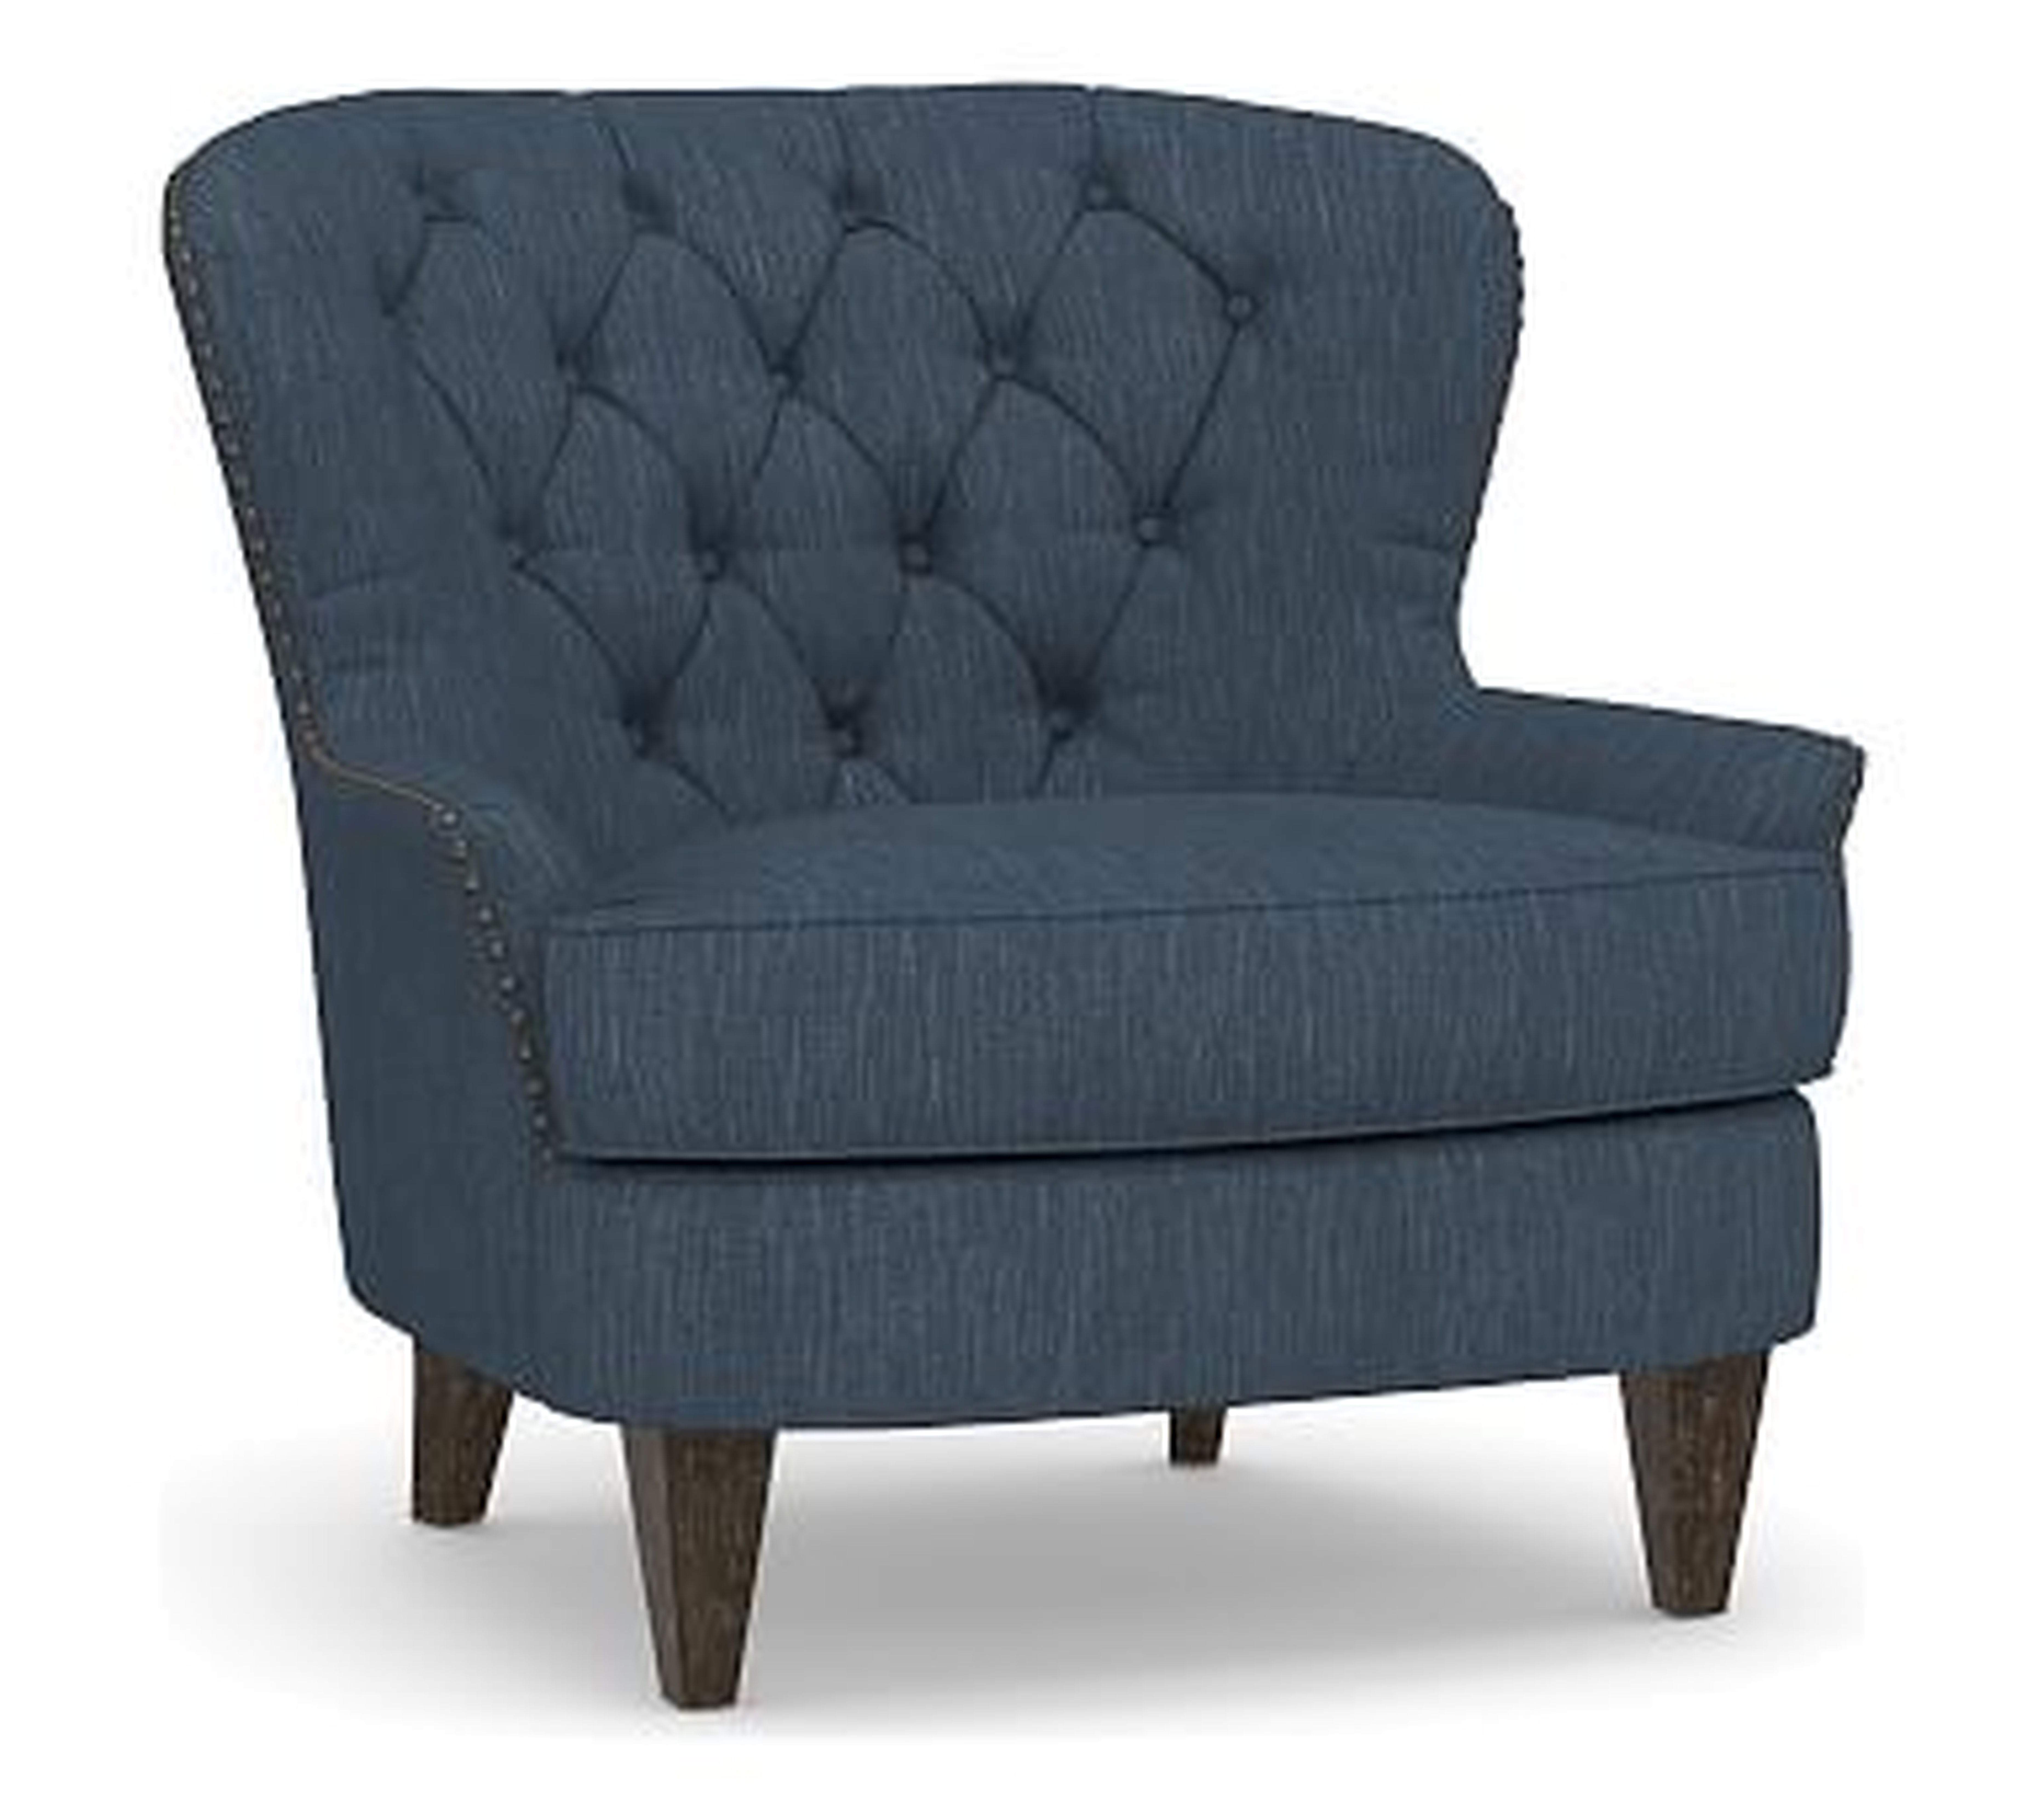 Cardiff Tufted Upholstered Armchair with Nailheads, Polyester Wrapped Cushions, Performance Heathered Tweed Indigo - Pottery Barn